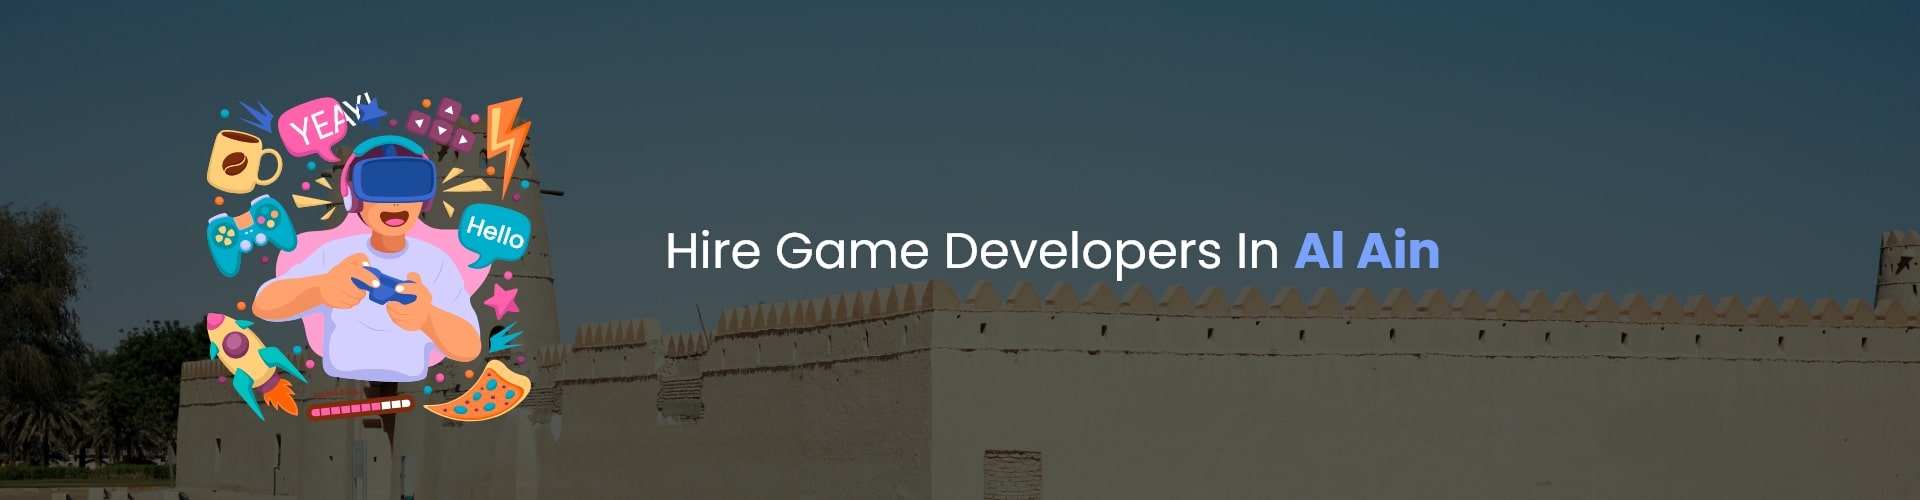 hire game developers in al ain